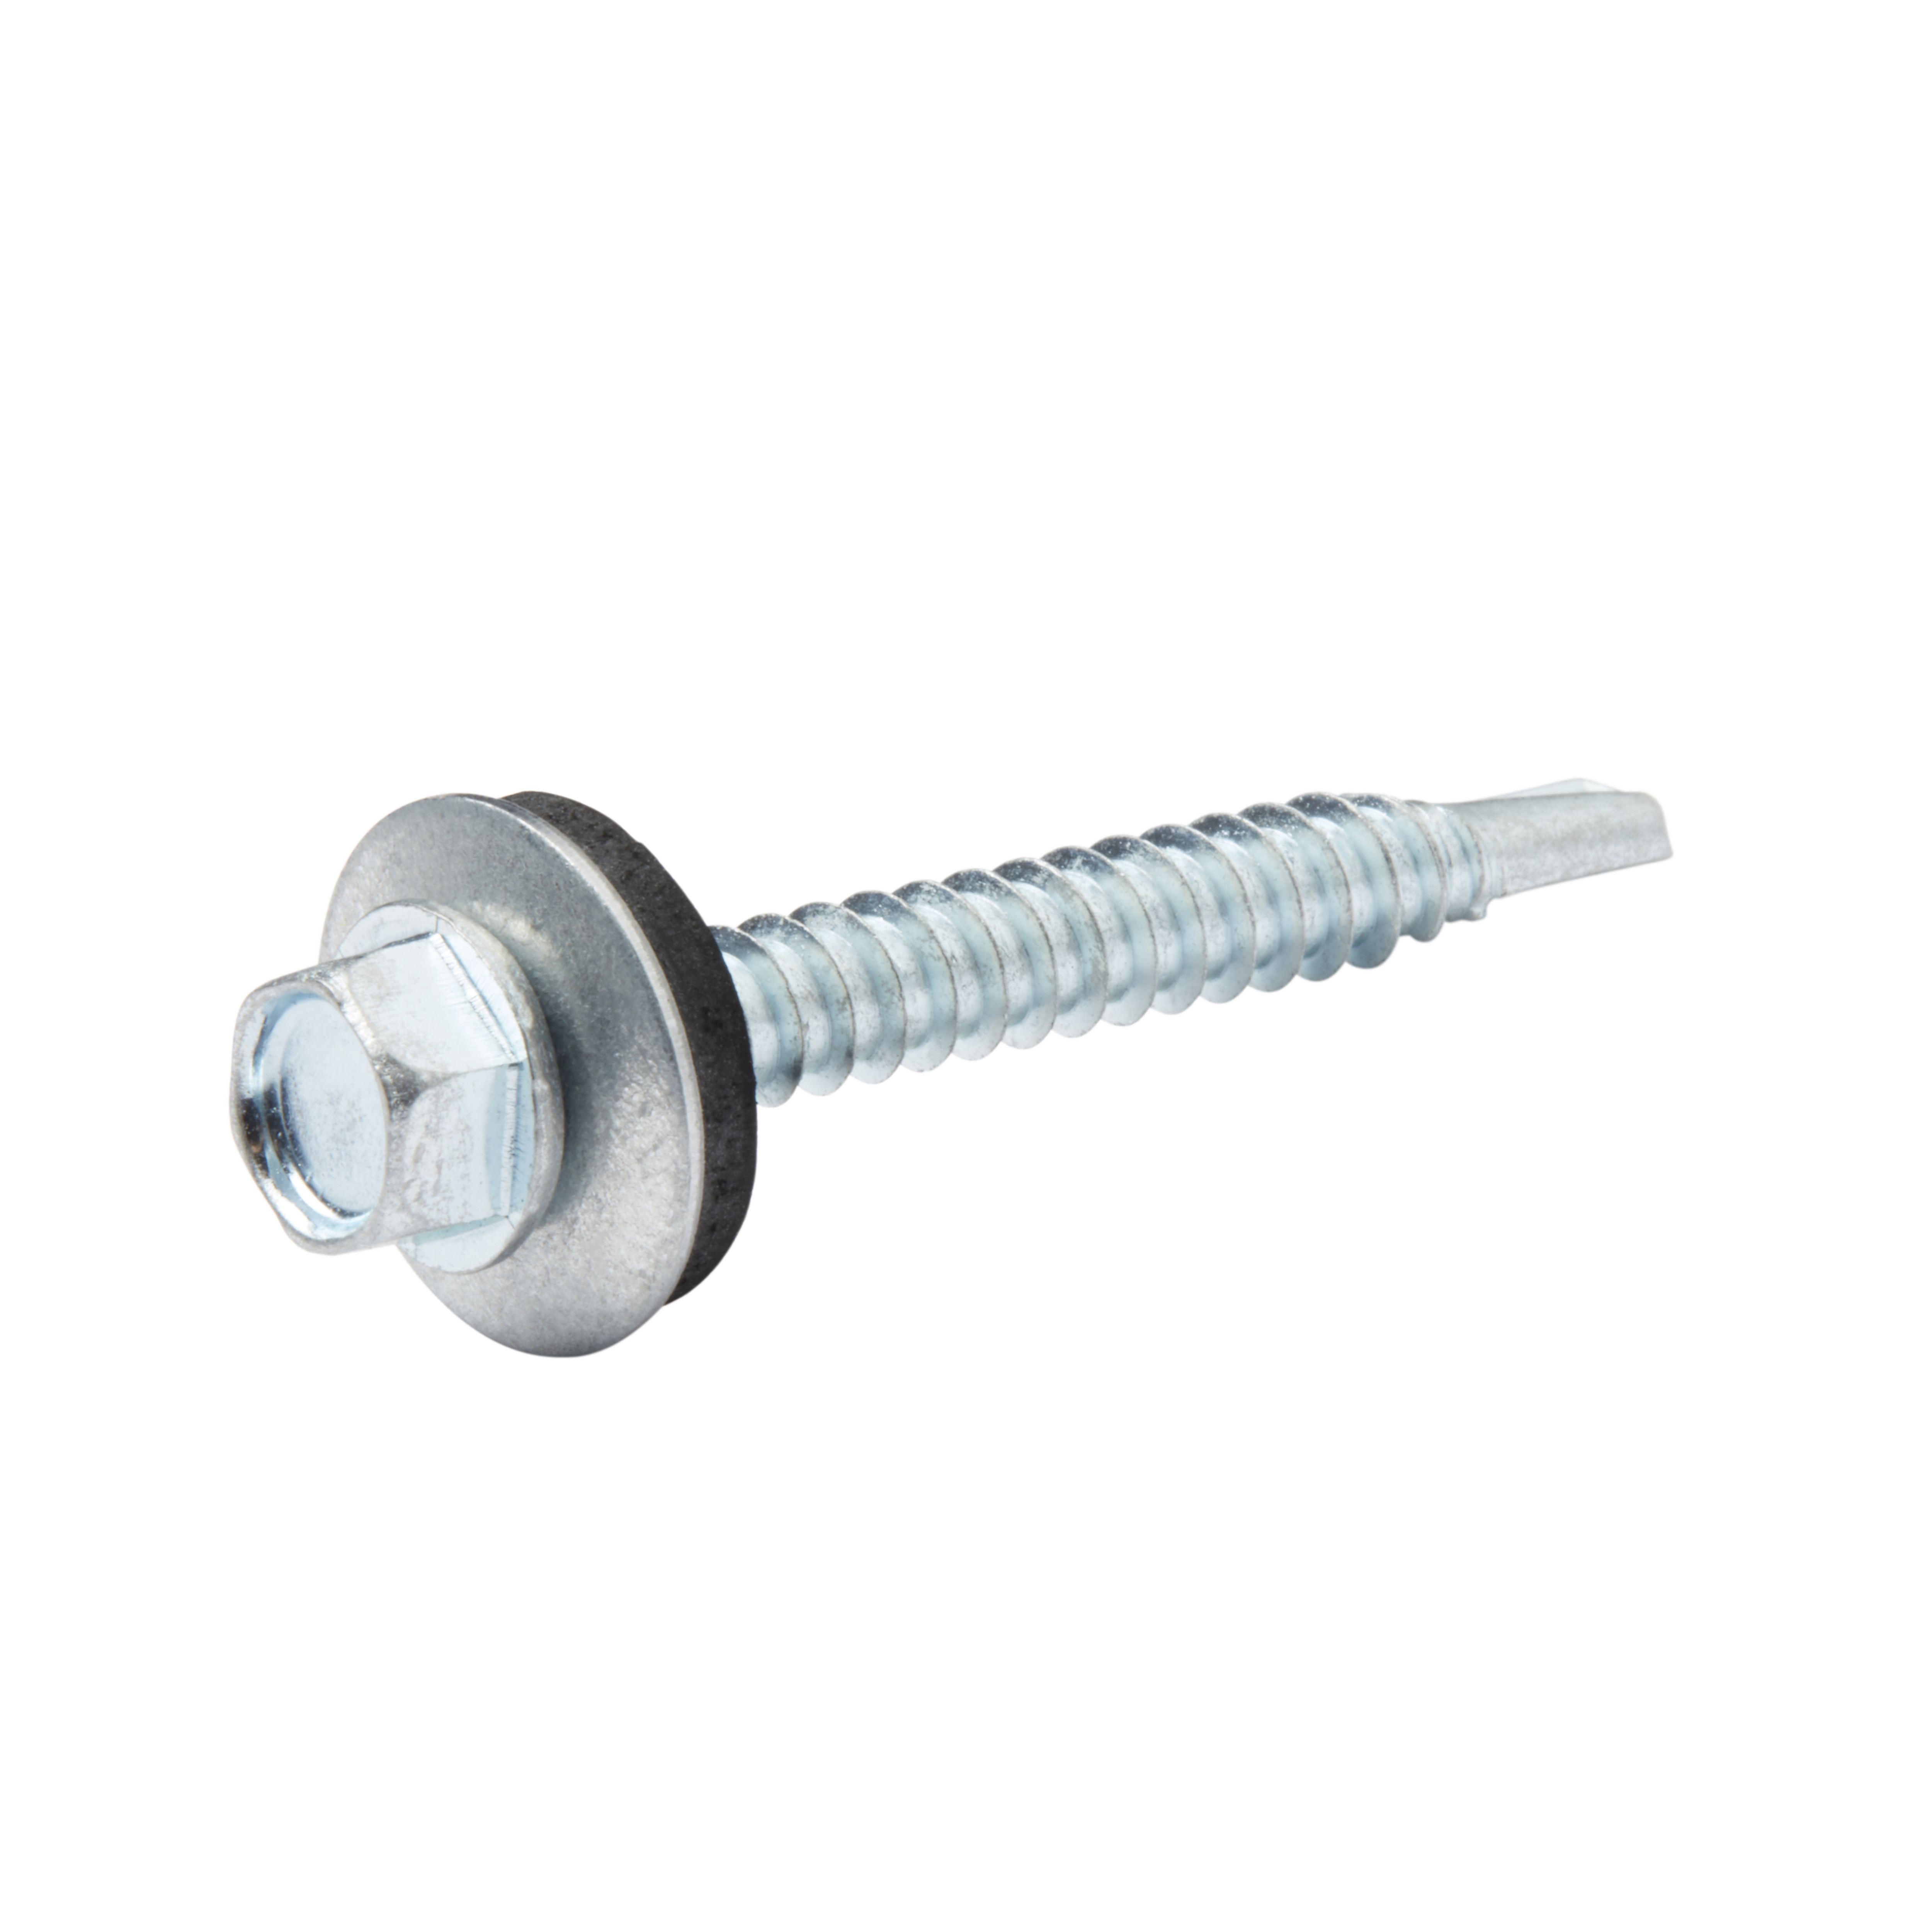 Diall Zinc-plated Carbon steel Roofing screw (Dia)5.5mm (L)45mm, Pack of 50